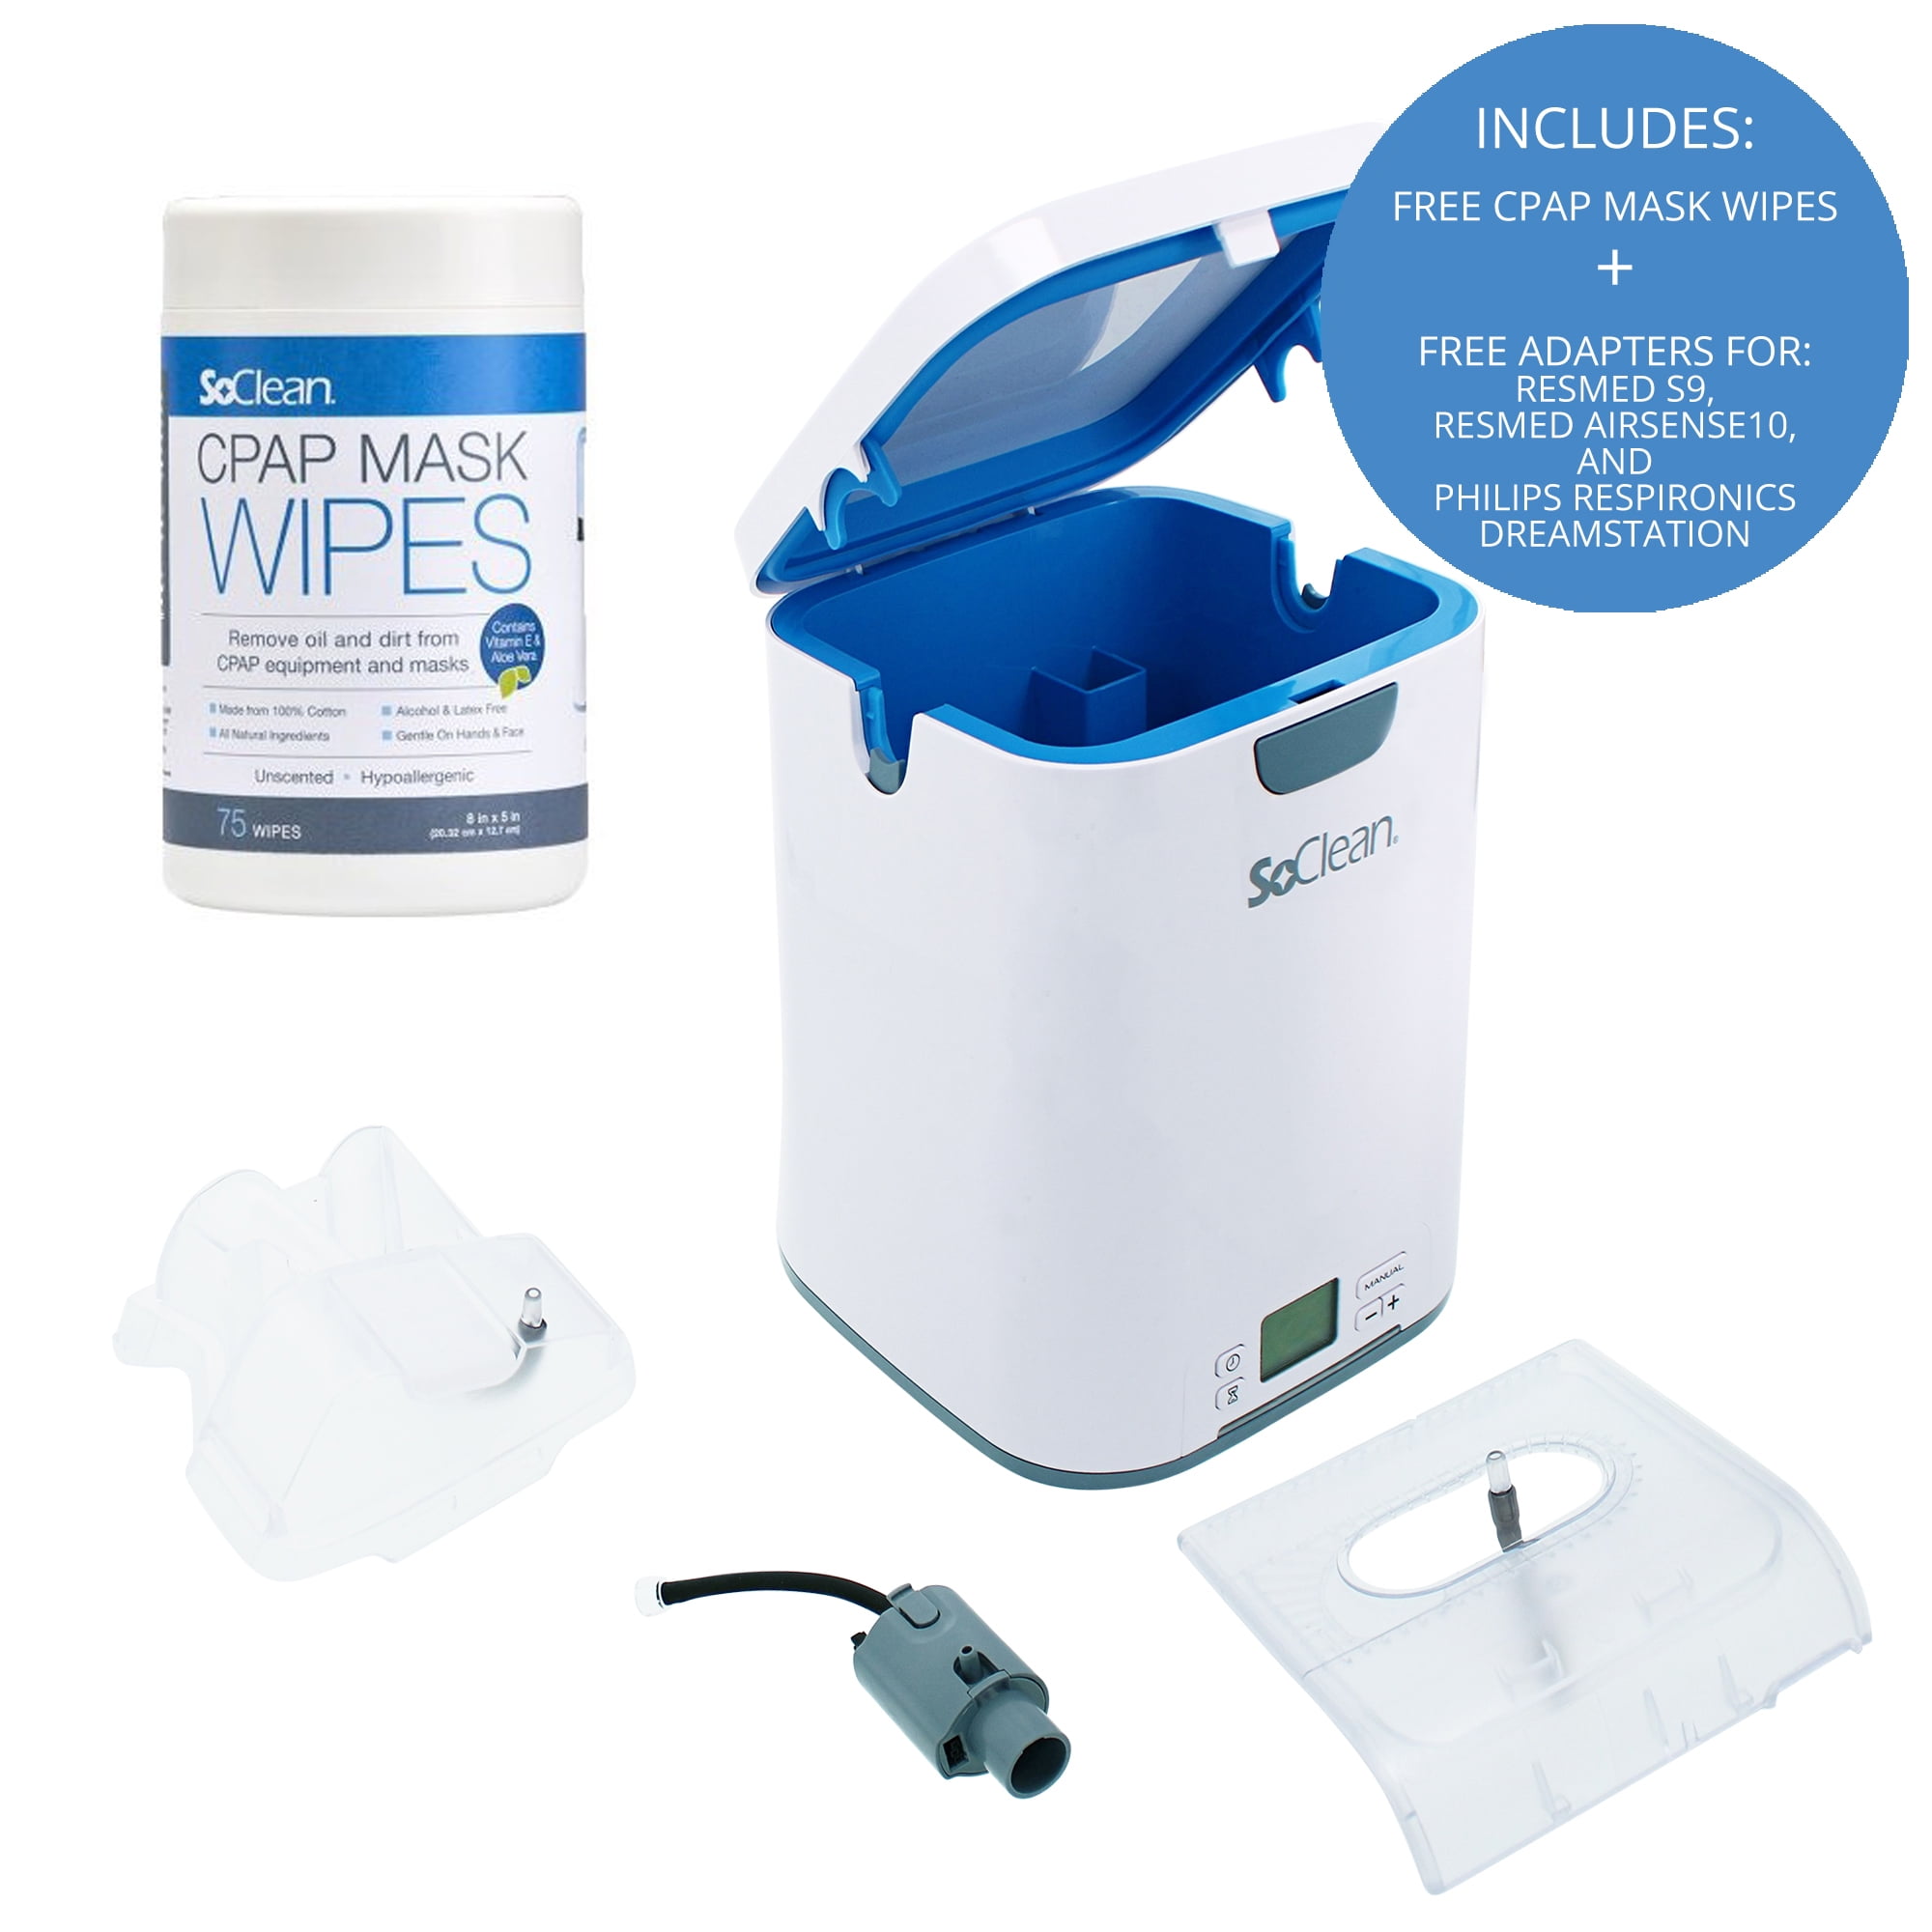 SoClean 2 CPAP Cleaner & Sanitizer (With ResMed AirSense 10 Adapter and  FREE Mask Wipes Included) - Walmart.com